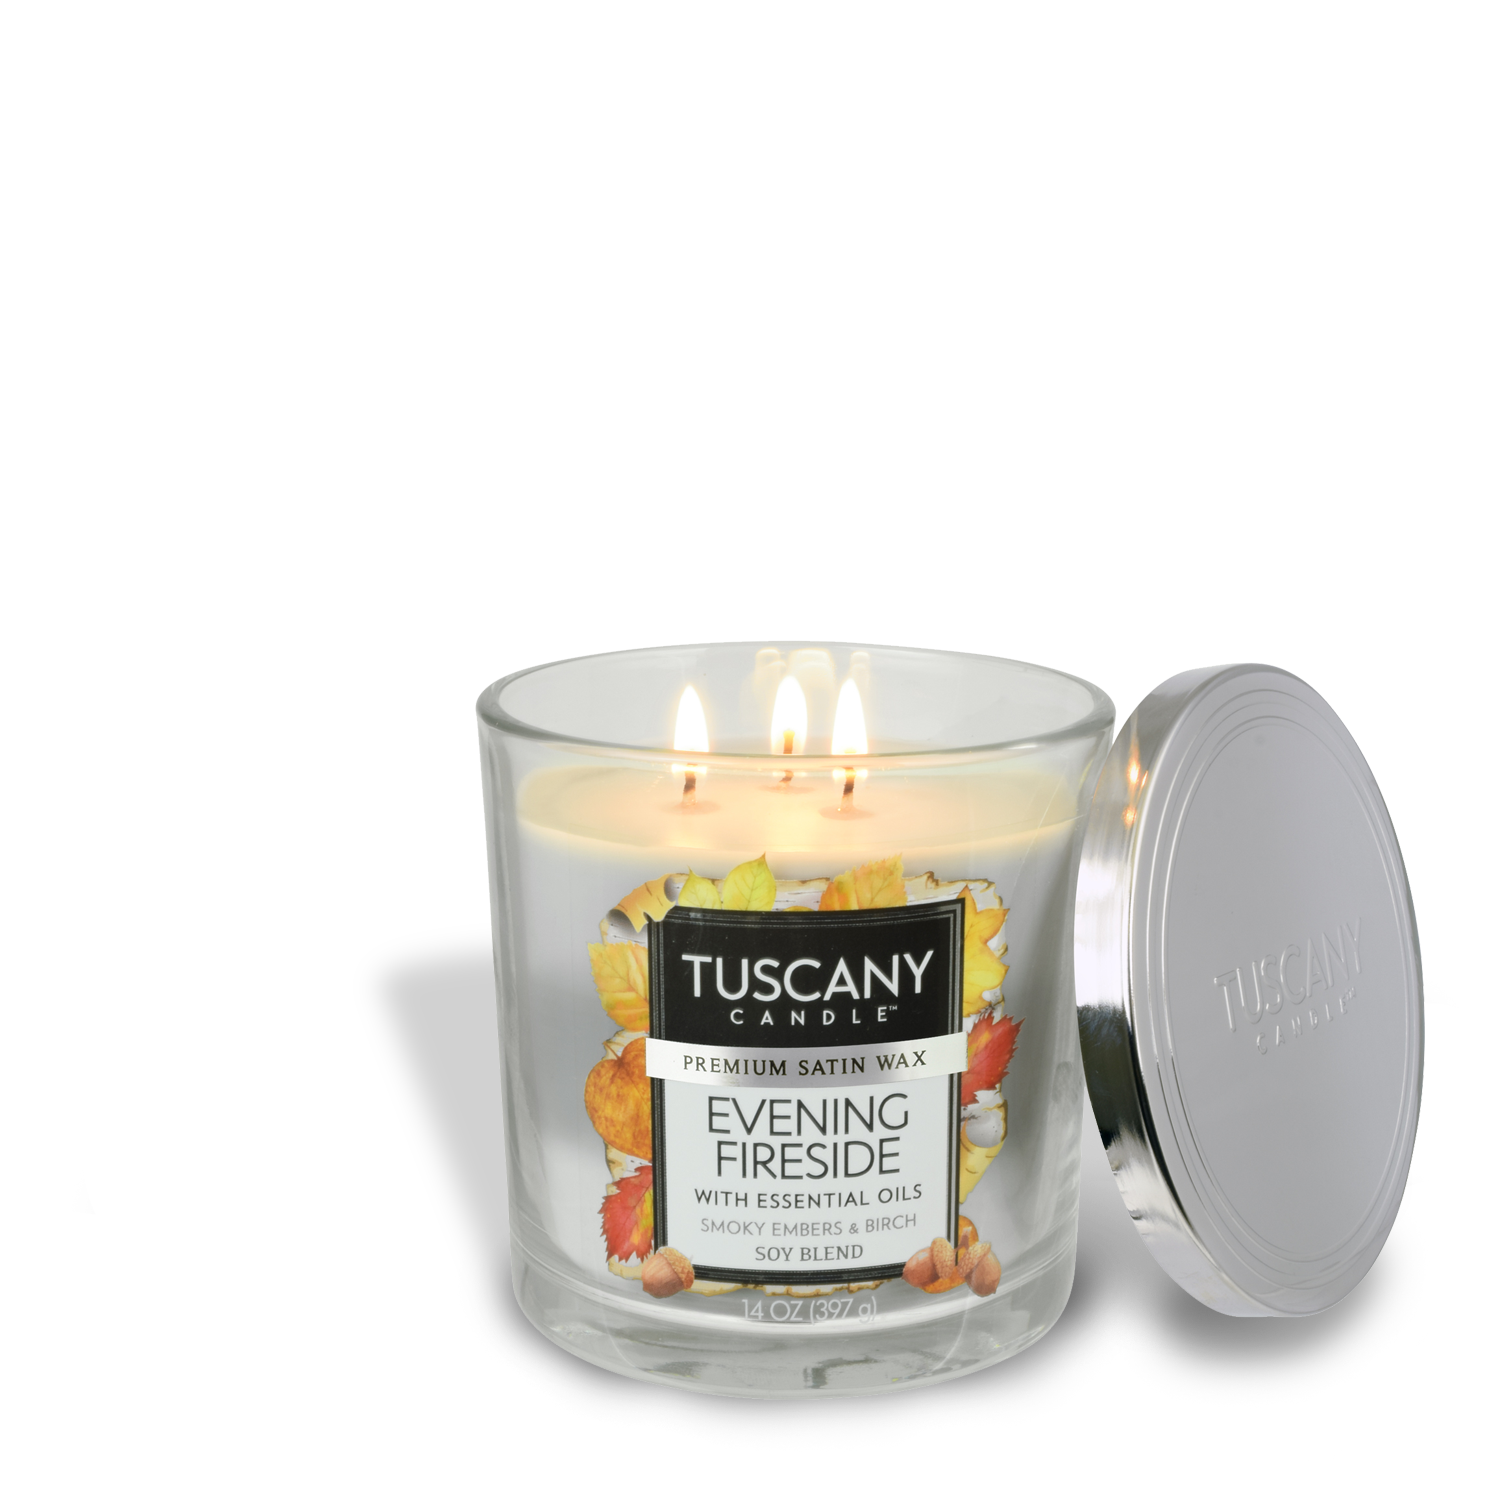 Evening Fireside Long-Lasting Scented Jar Candle (14 oz) by Tuscany Candle is a triple-poured candle with a woodsy fragrance.